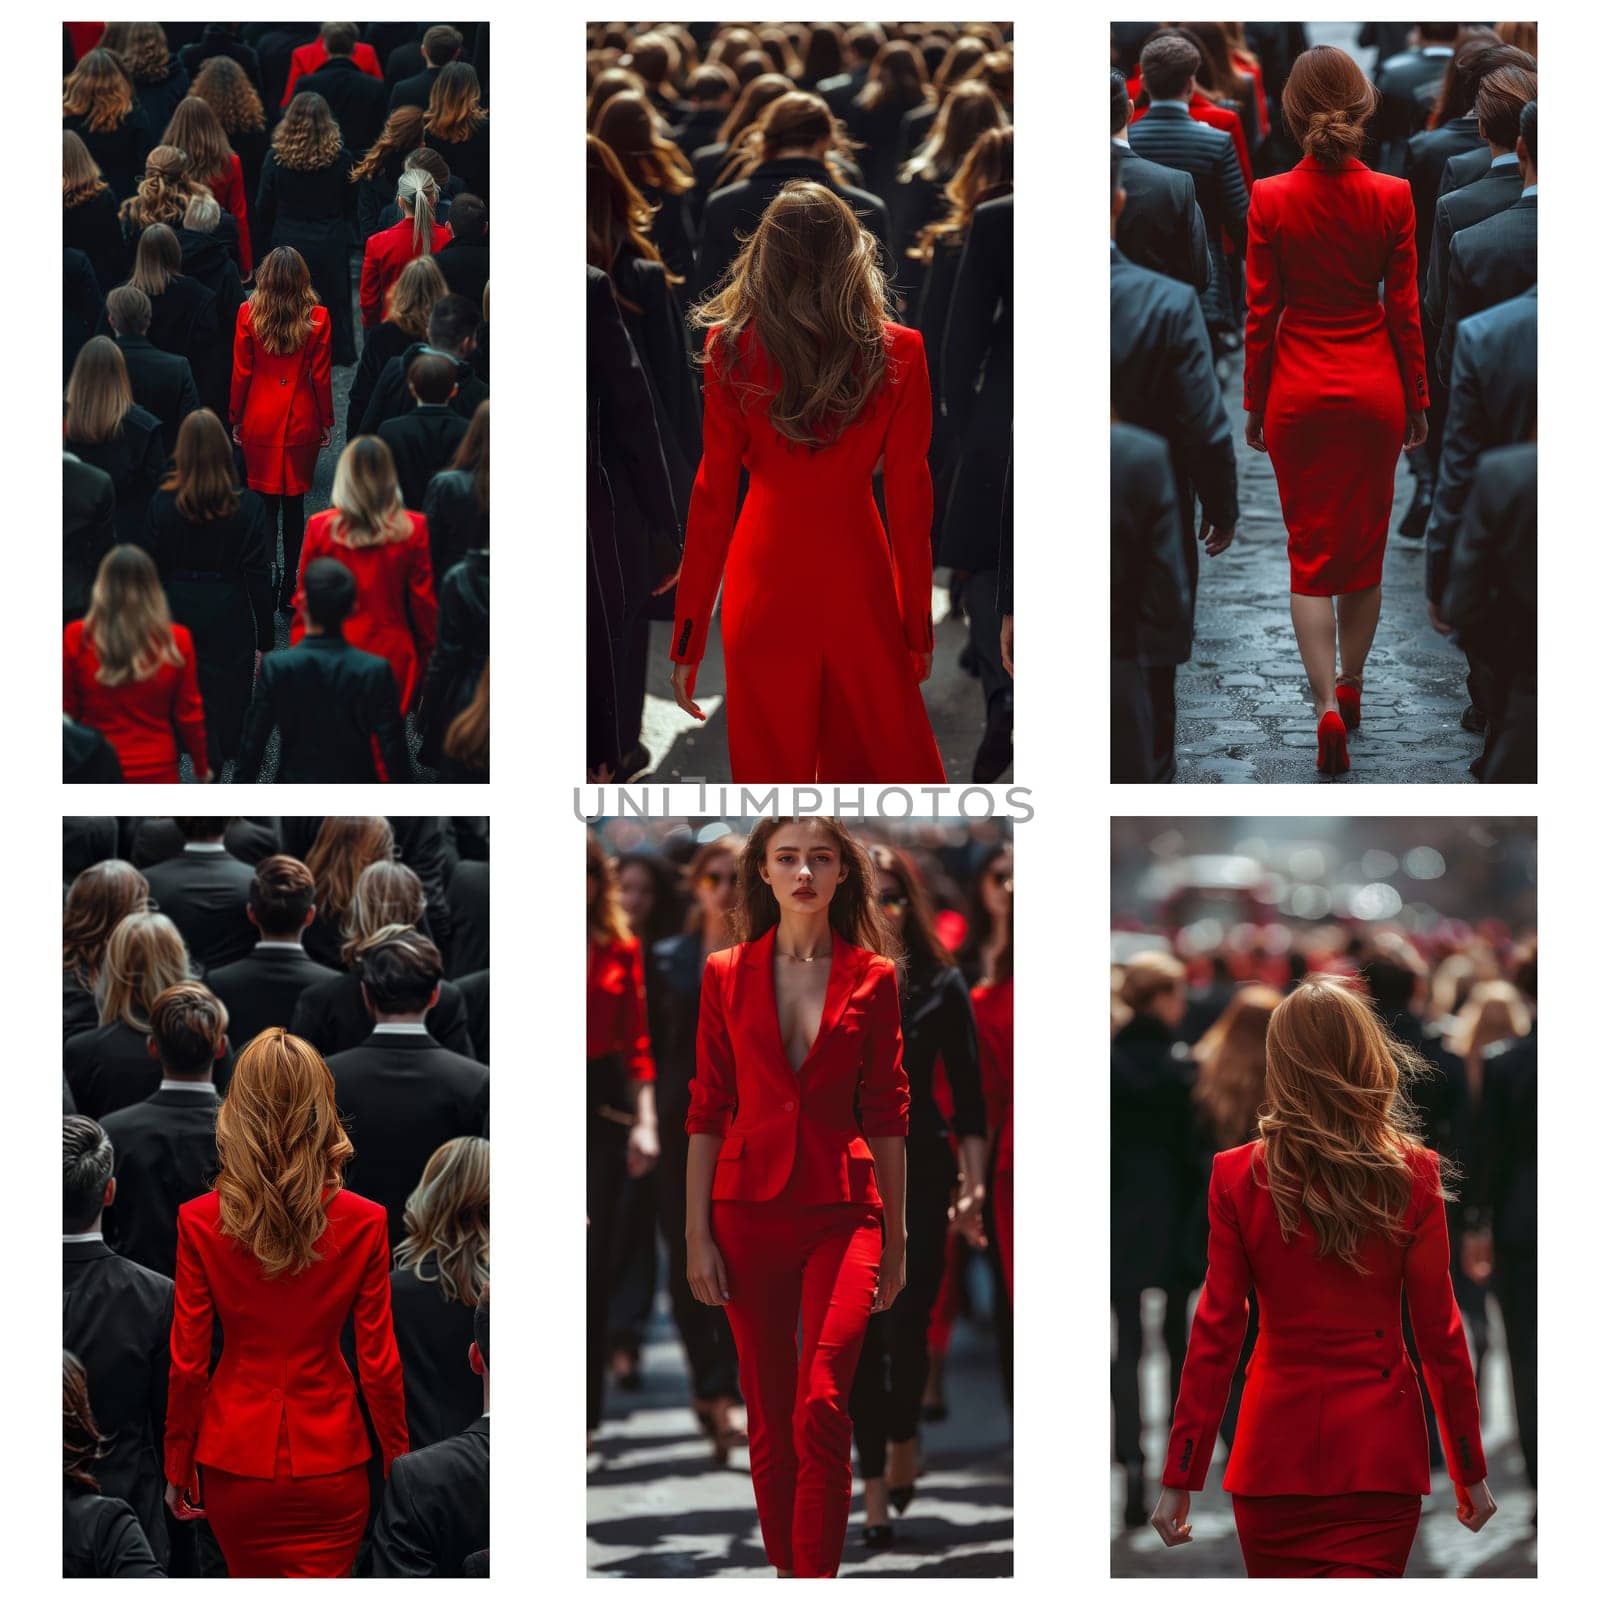 A woman in a red dress walks down a crowded street by itchaznong